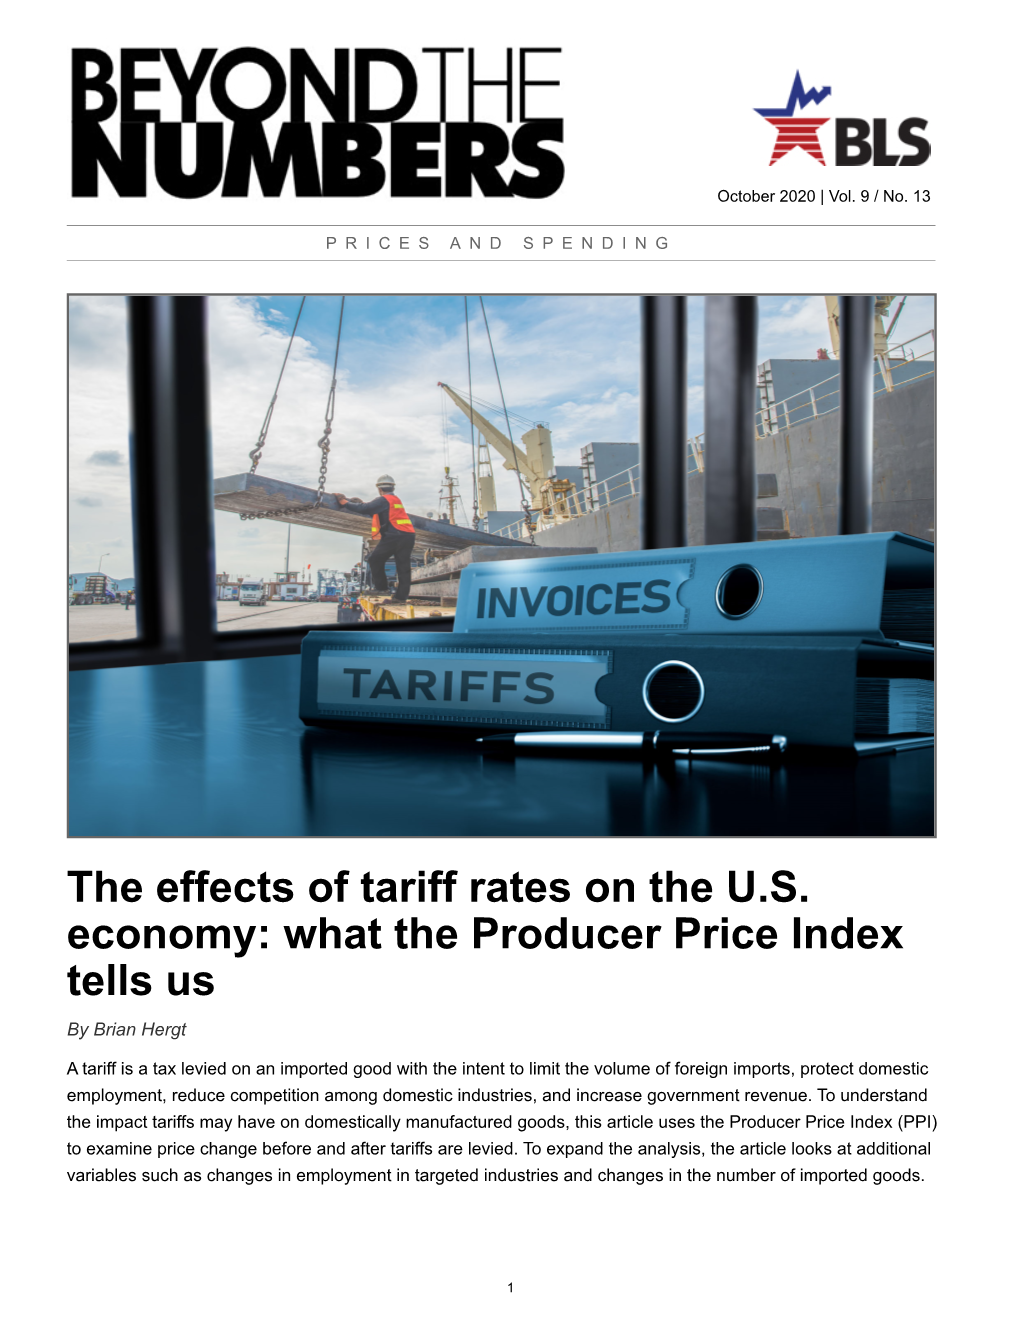 The Effects of Tariff Rates on the U.S. Economy: What the Producer Price Index Tells Us by Brian Hergt